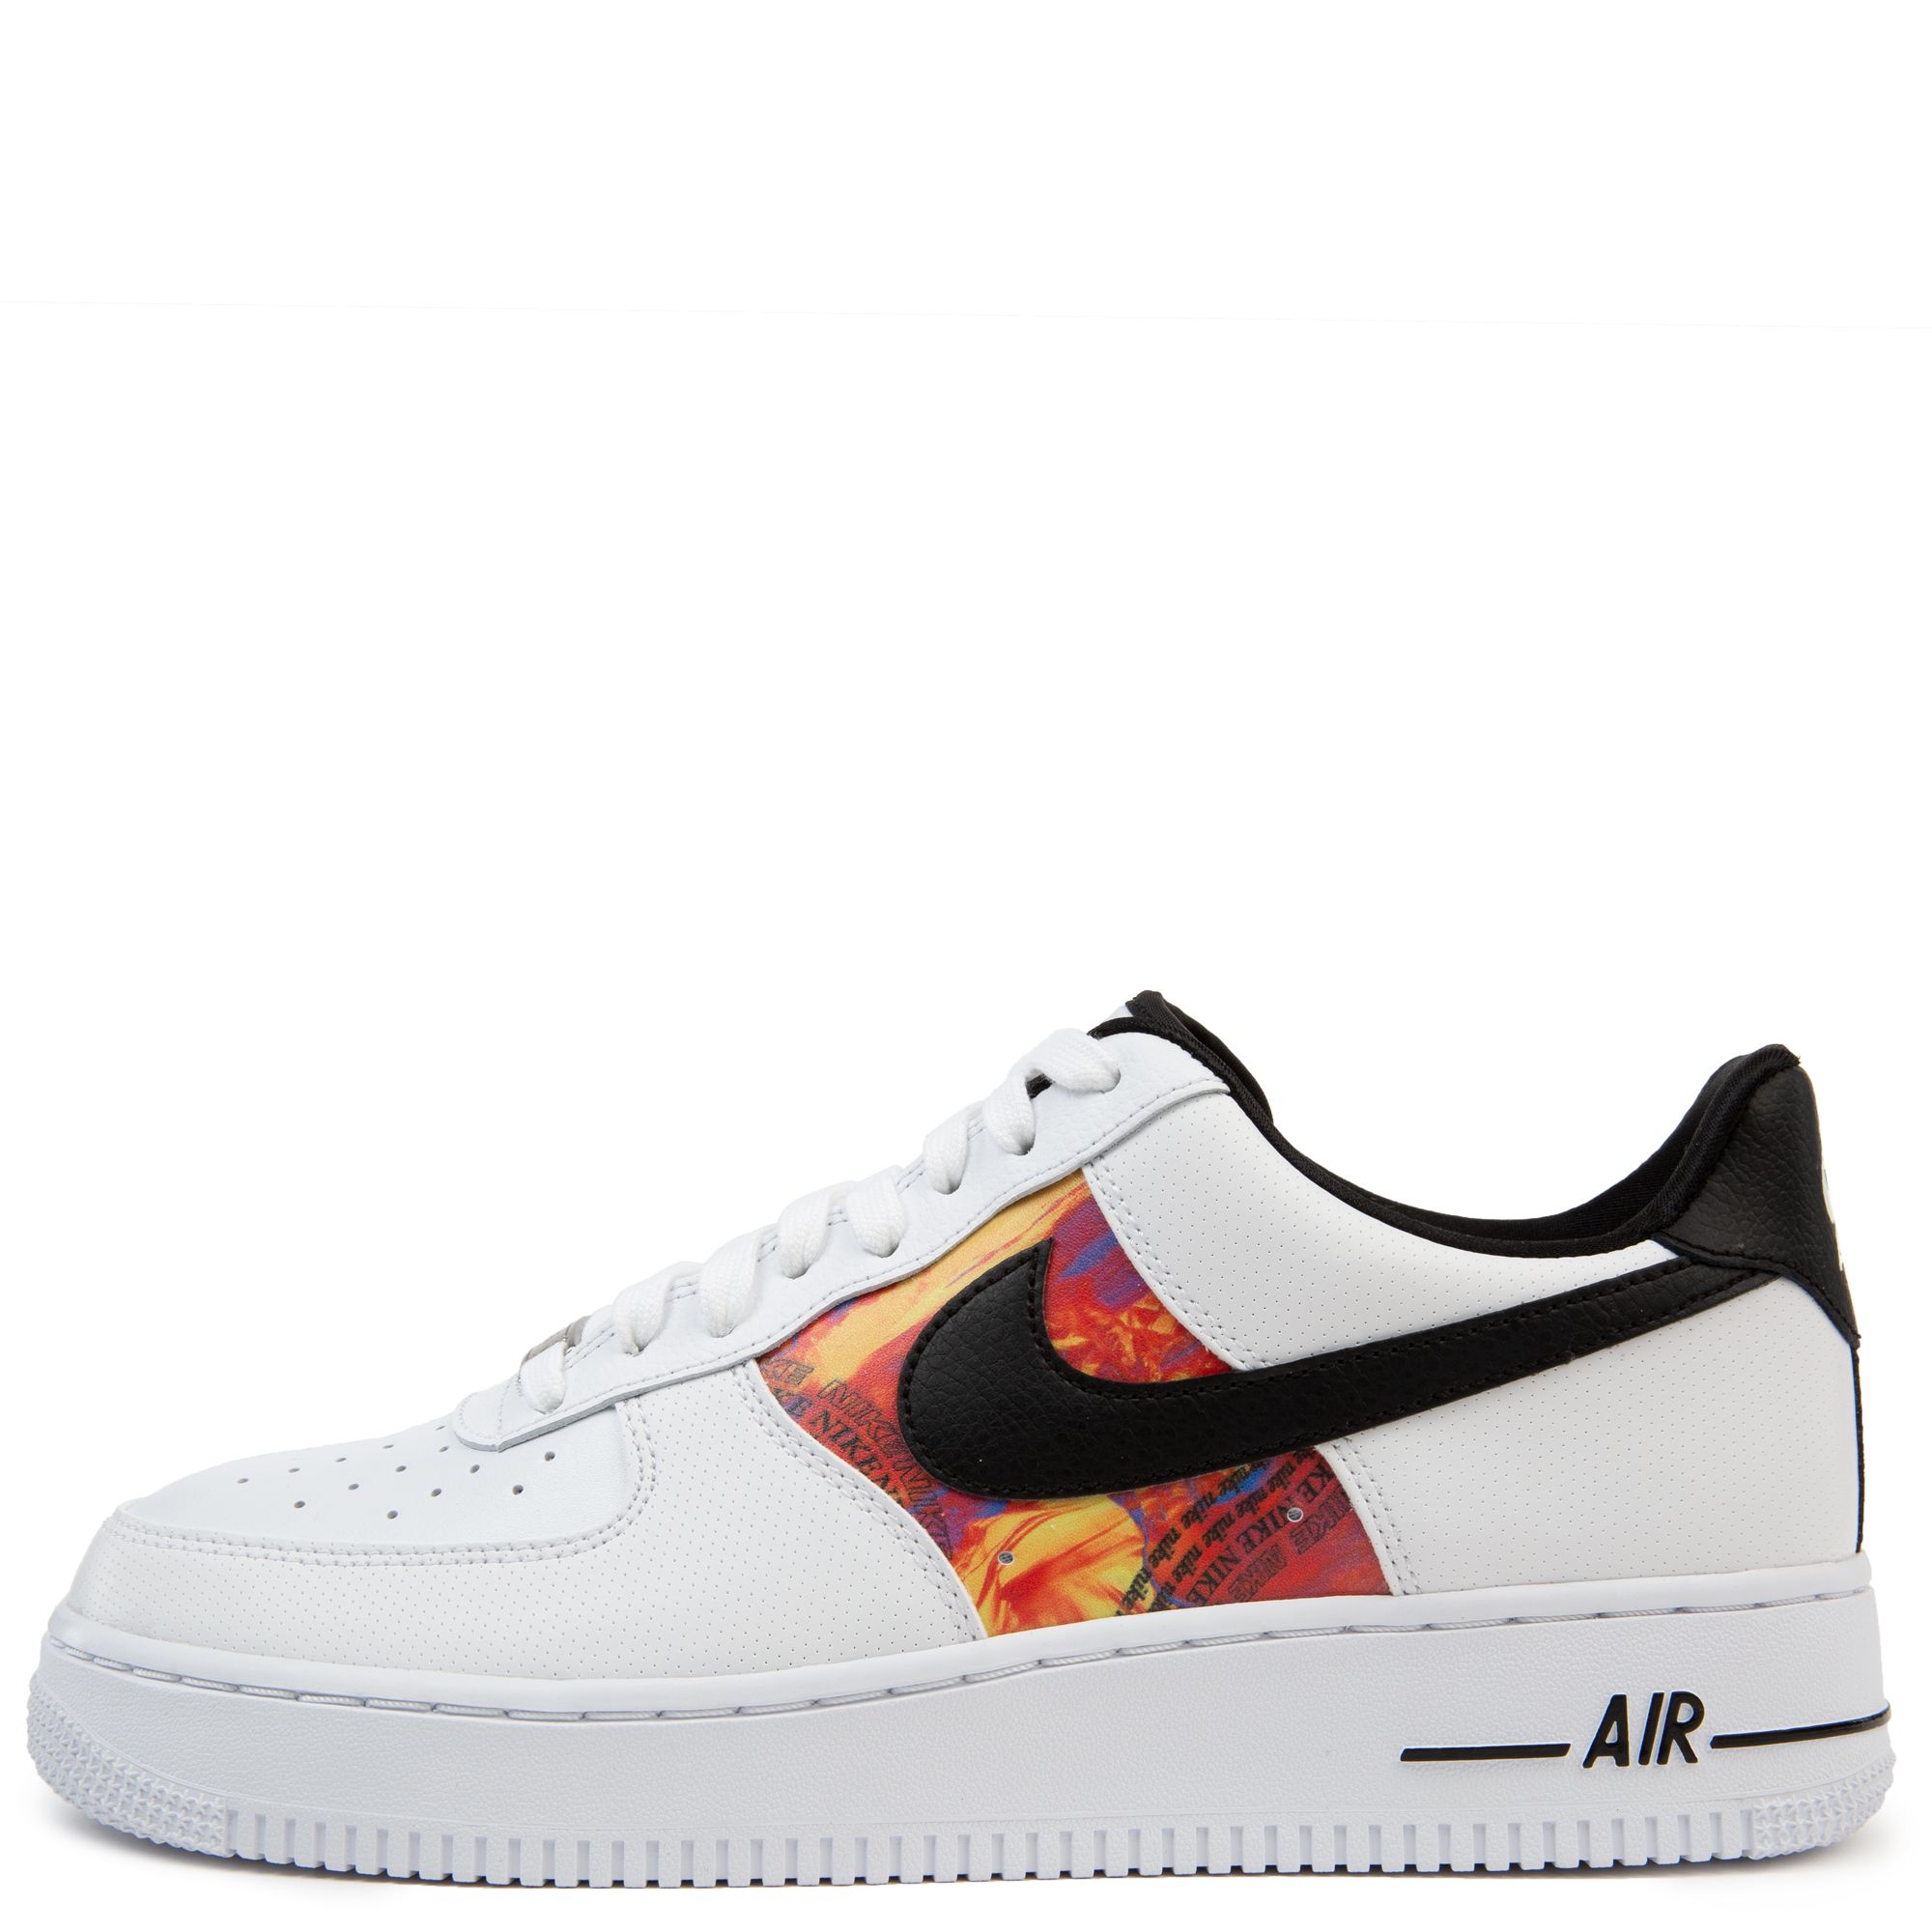 Nike Air Force 1 '07 LV8 sneakers in white, black and orange